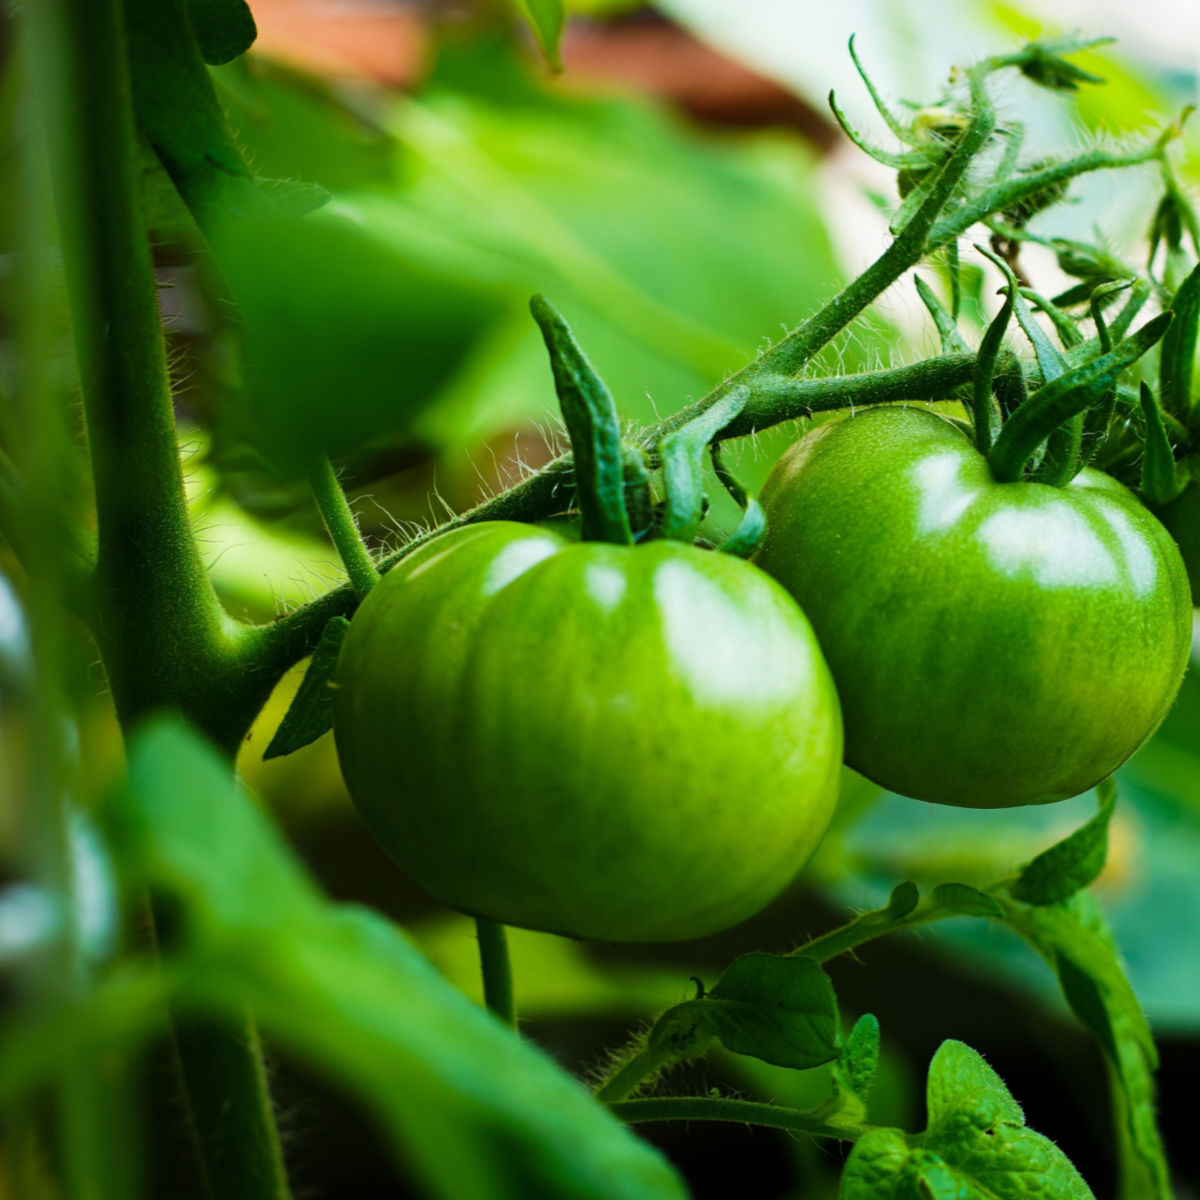 Fertilizing Tomato Plants - How To Give Tomatoes Perfect Power!